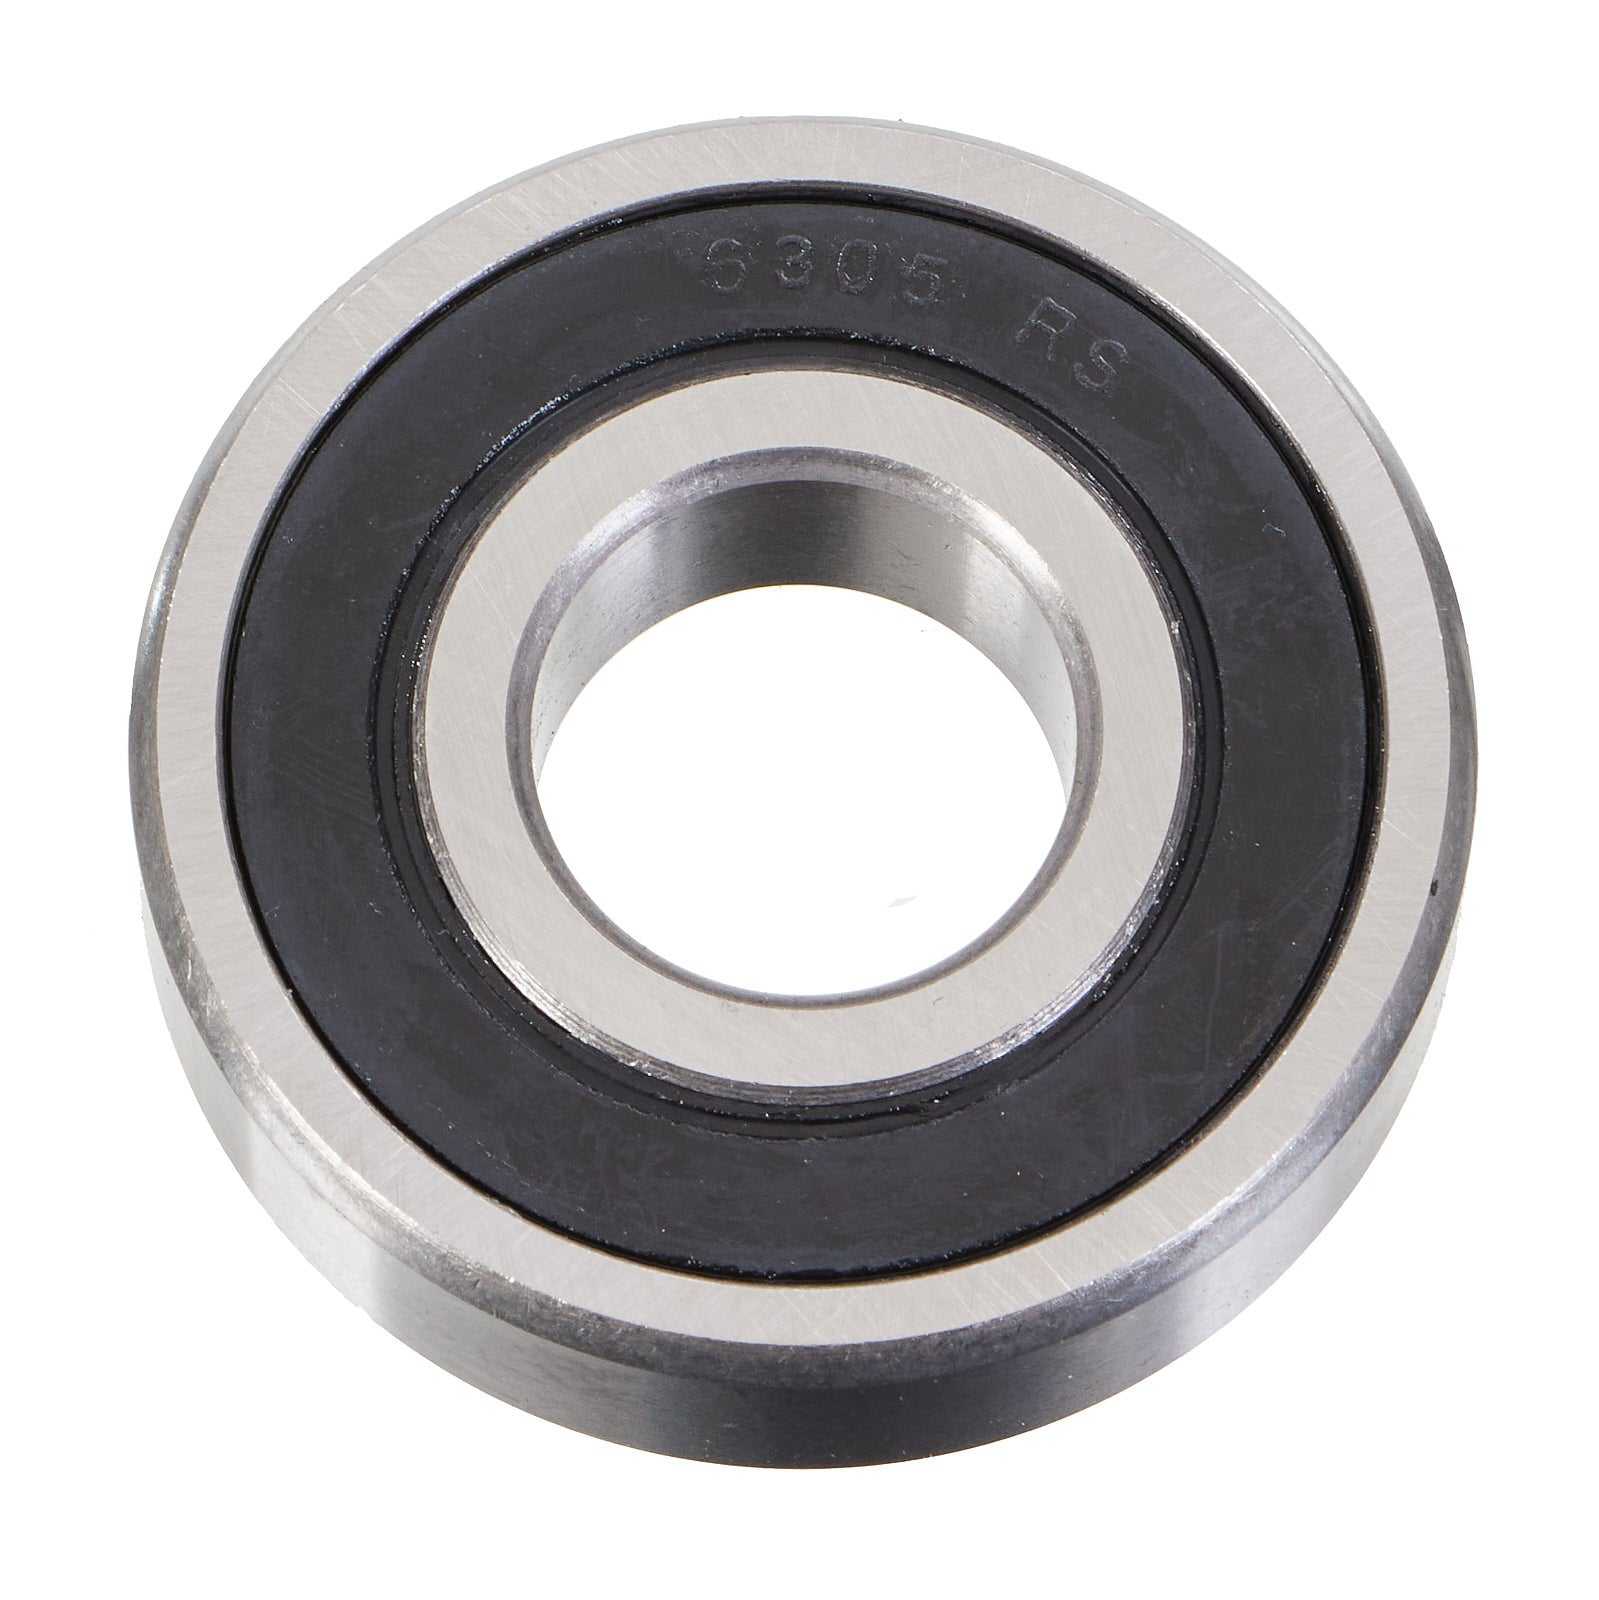 Whites Motorcycle Parts, BEARING 6305-2RS 1 PCE/EACH